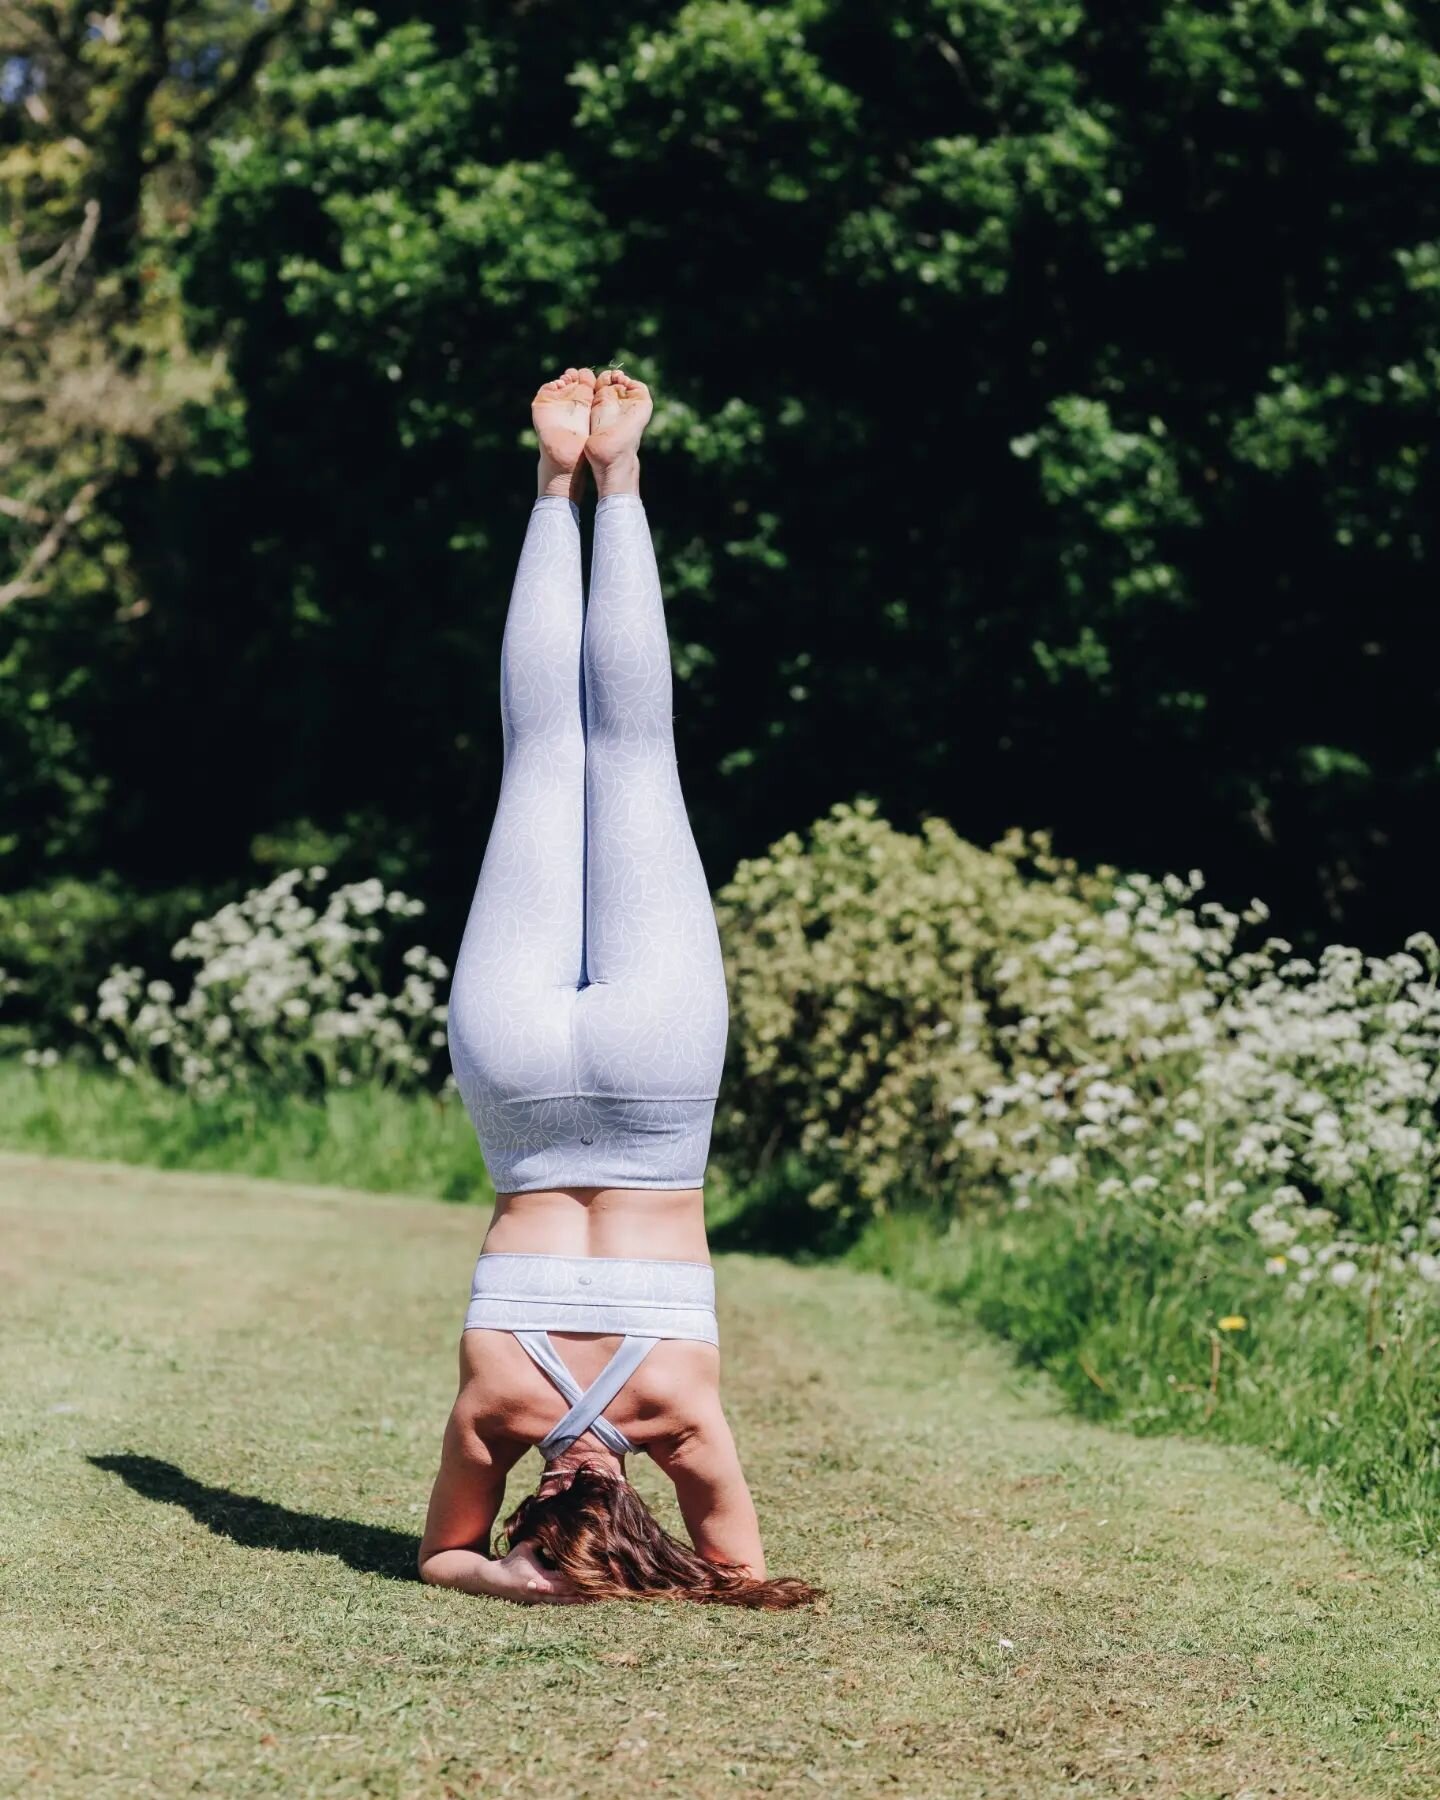 Upside down or right side up, our eco apparel moulds to the body, no matter what shape you make.

🐻🌻

#ecoyoga
#repreve #reprevefabric #zenbear
#zenbearyoga